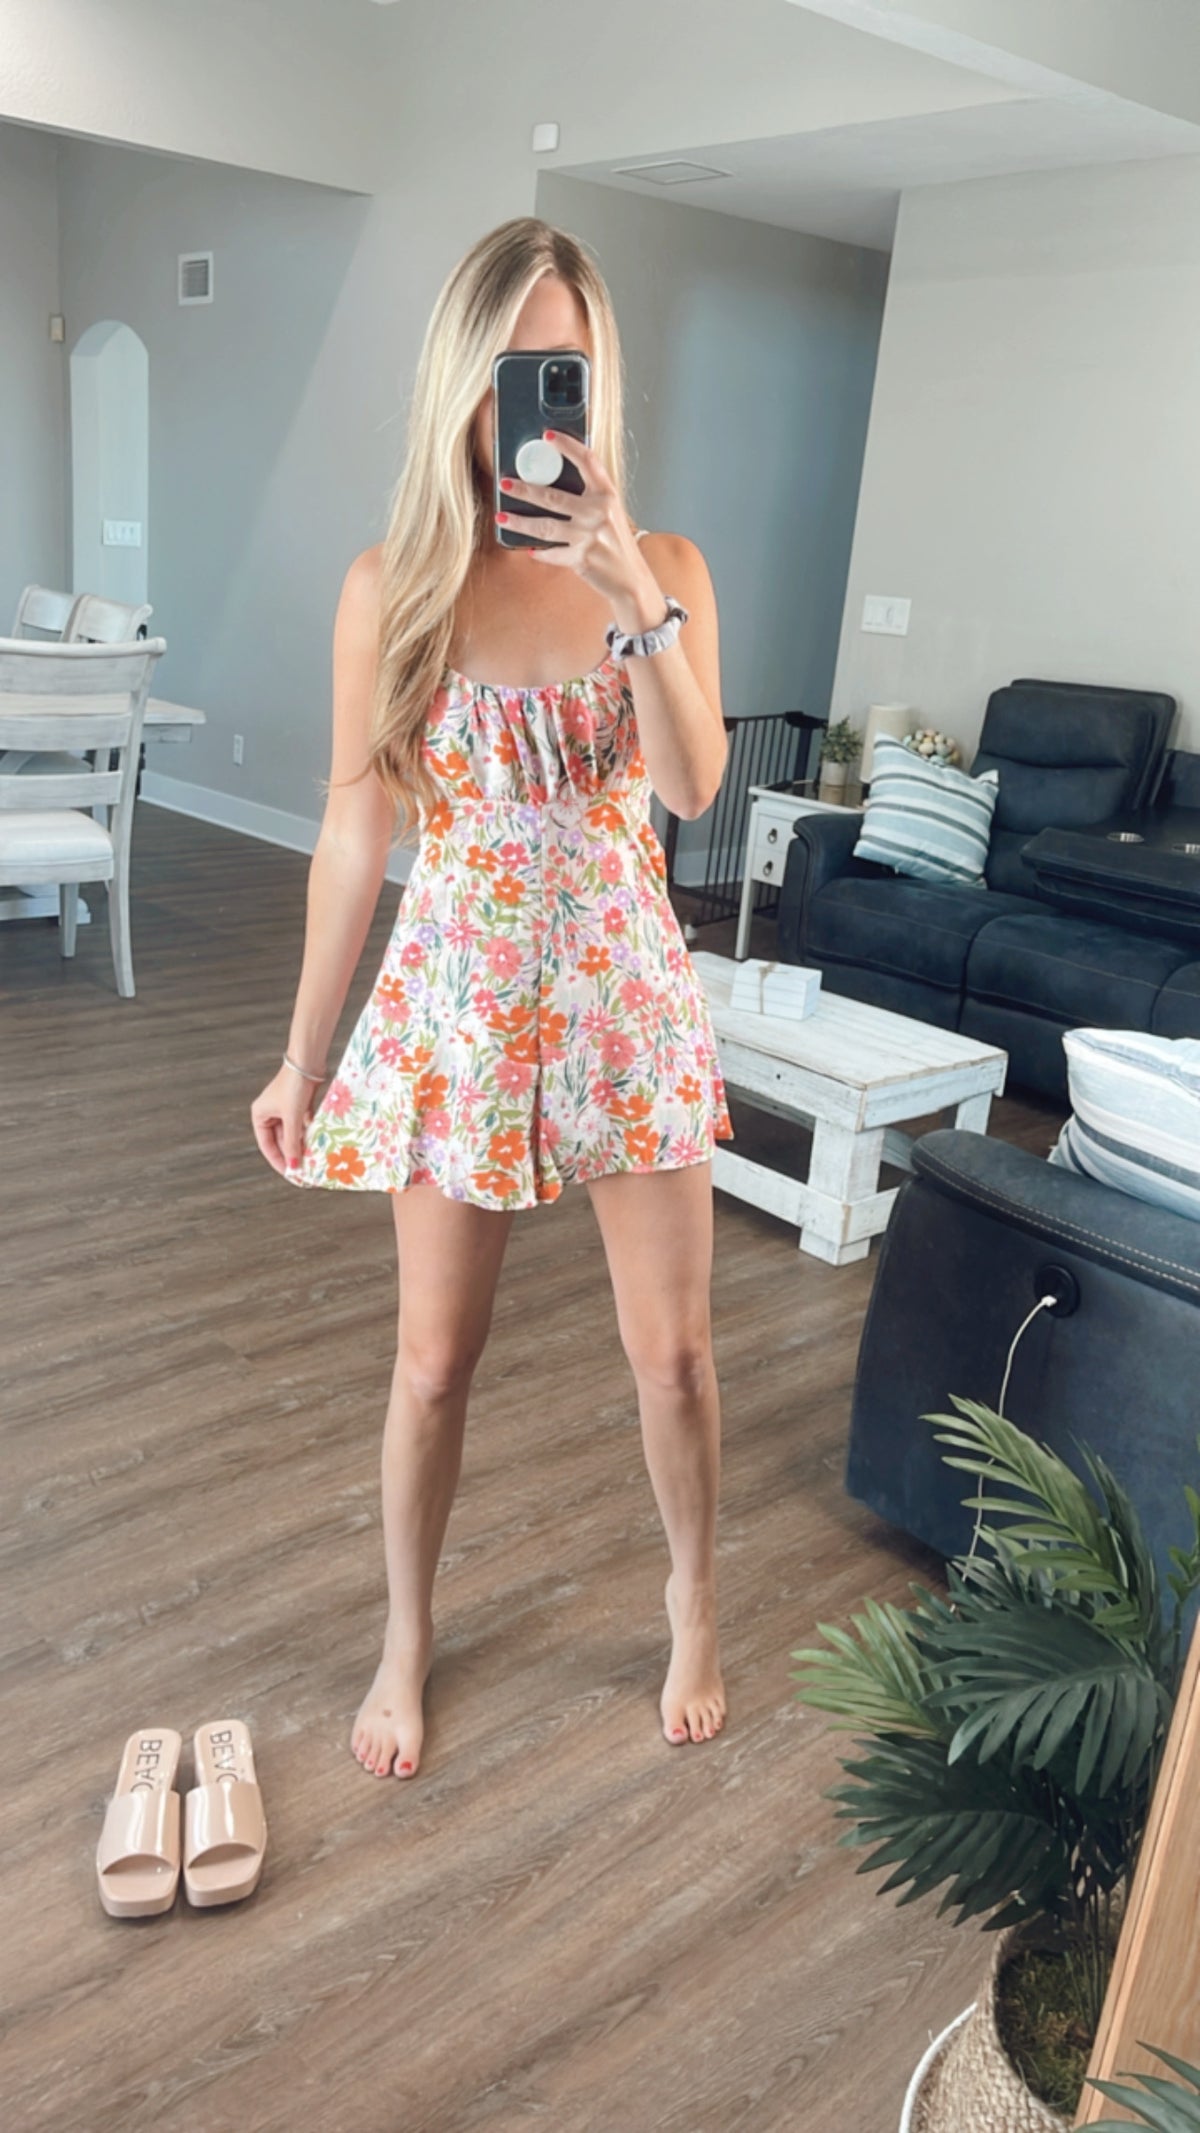 All about floral romper